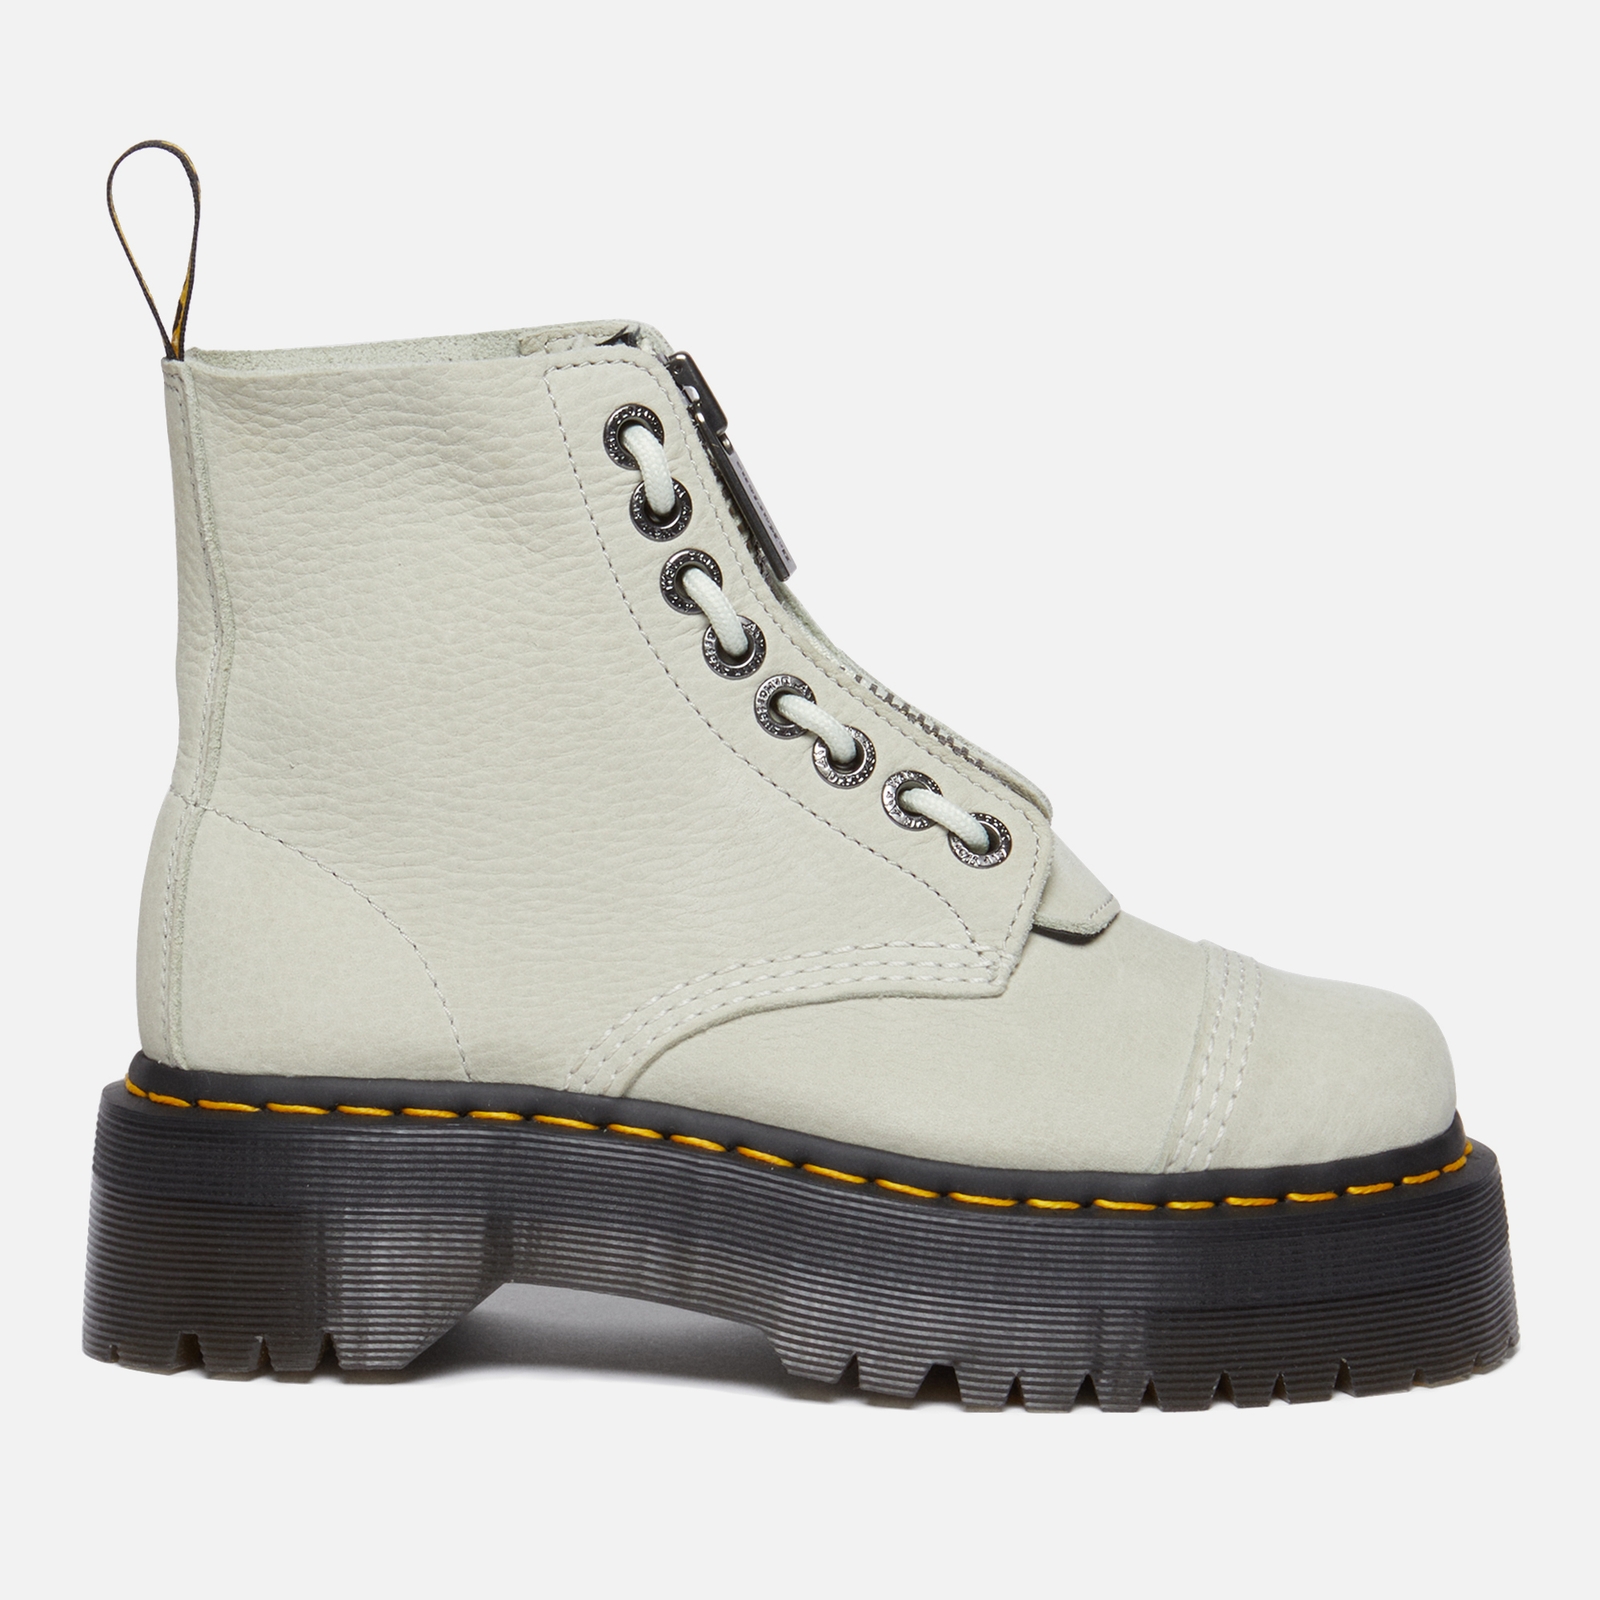 Dr. Martens Women's Sinclair Leather Zip Front Boots - Smoked Mint